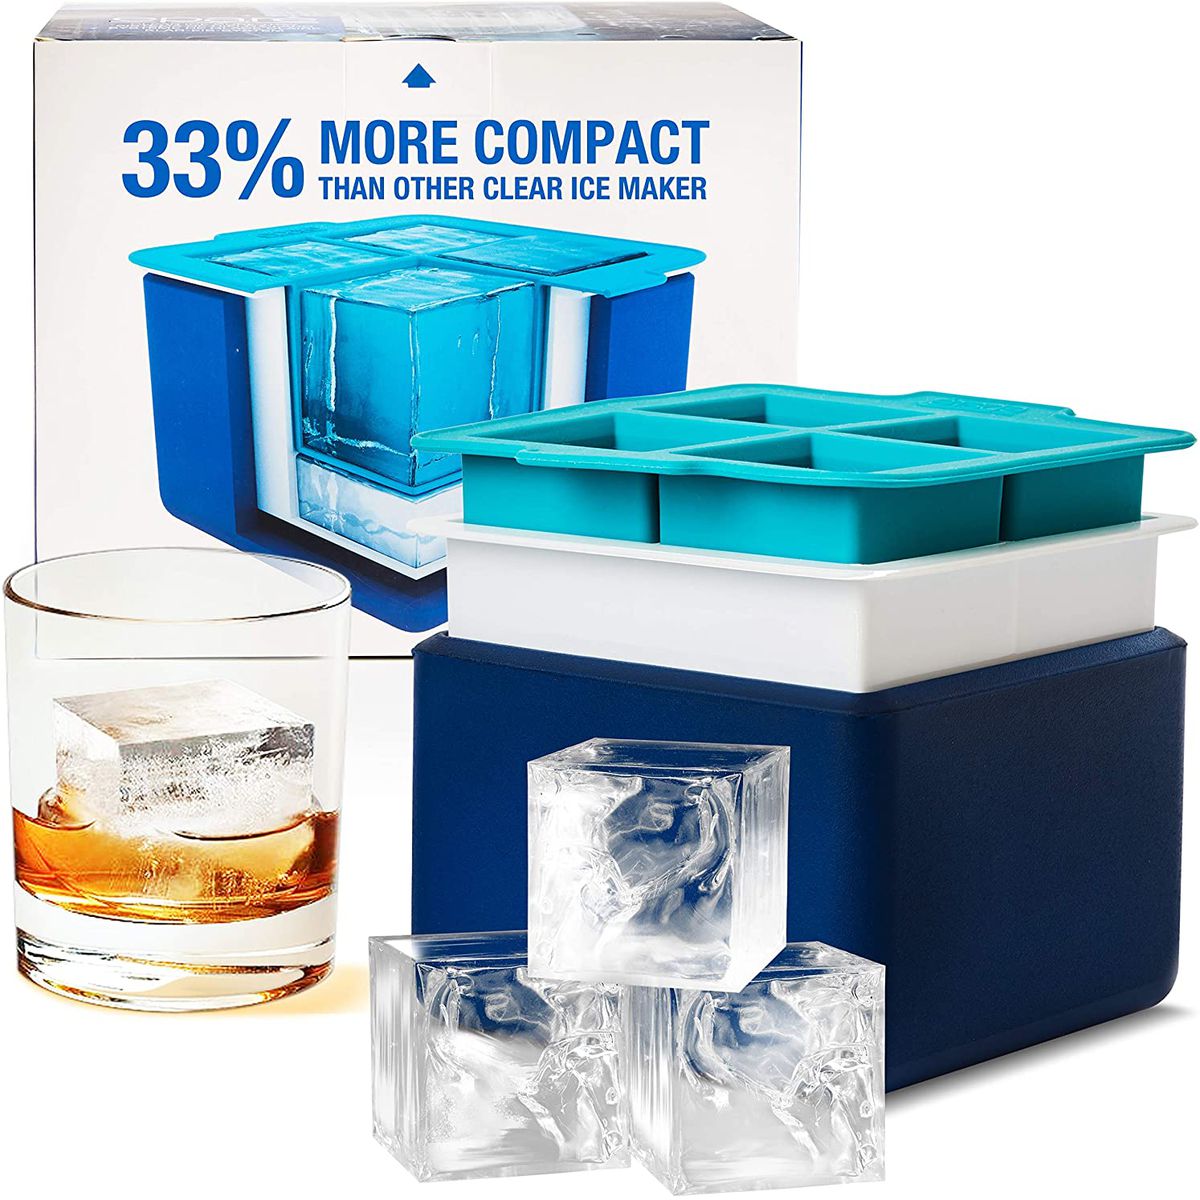 A cubed-shape clear ice cube maker